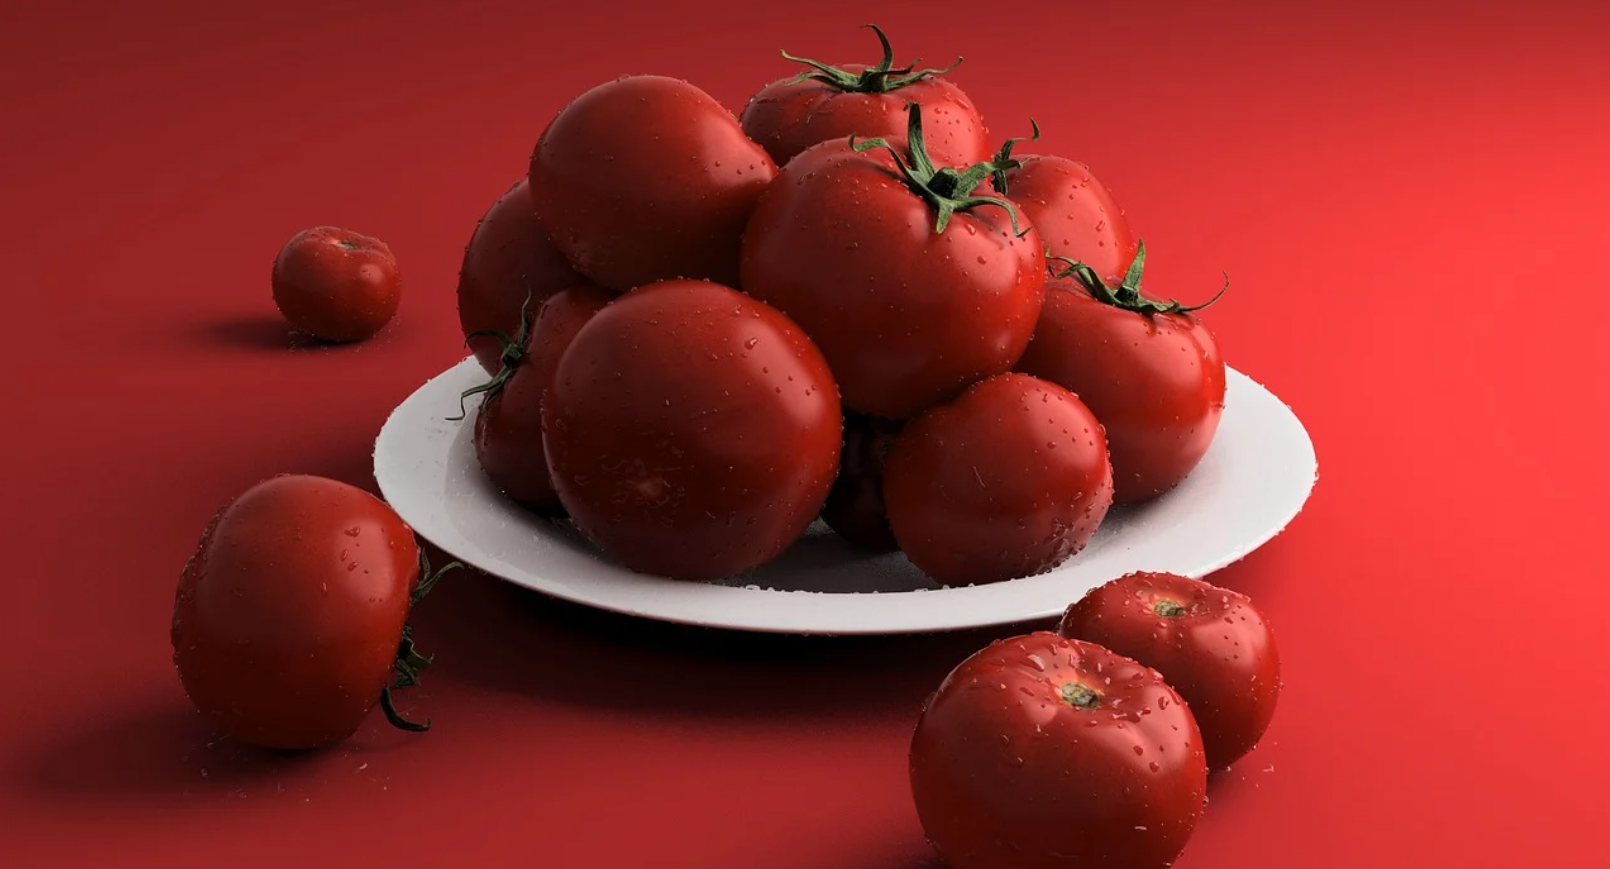 How to prepare ketchup from tomatoes